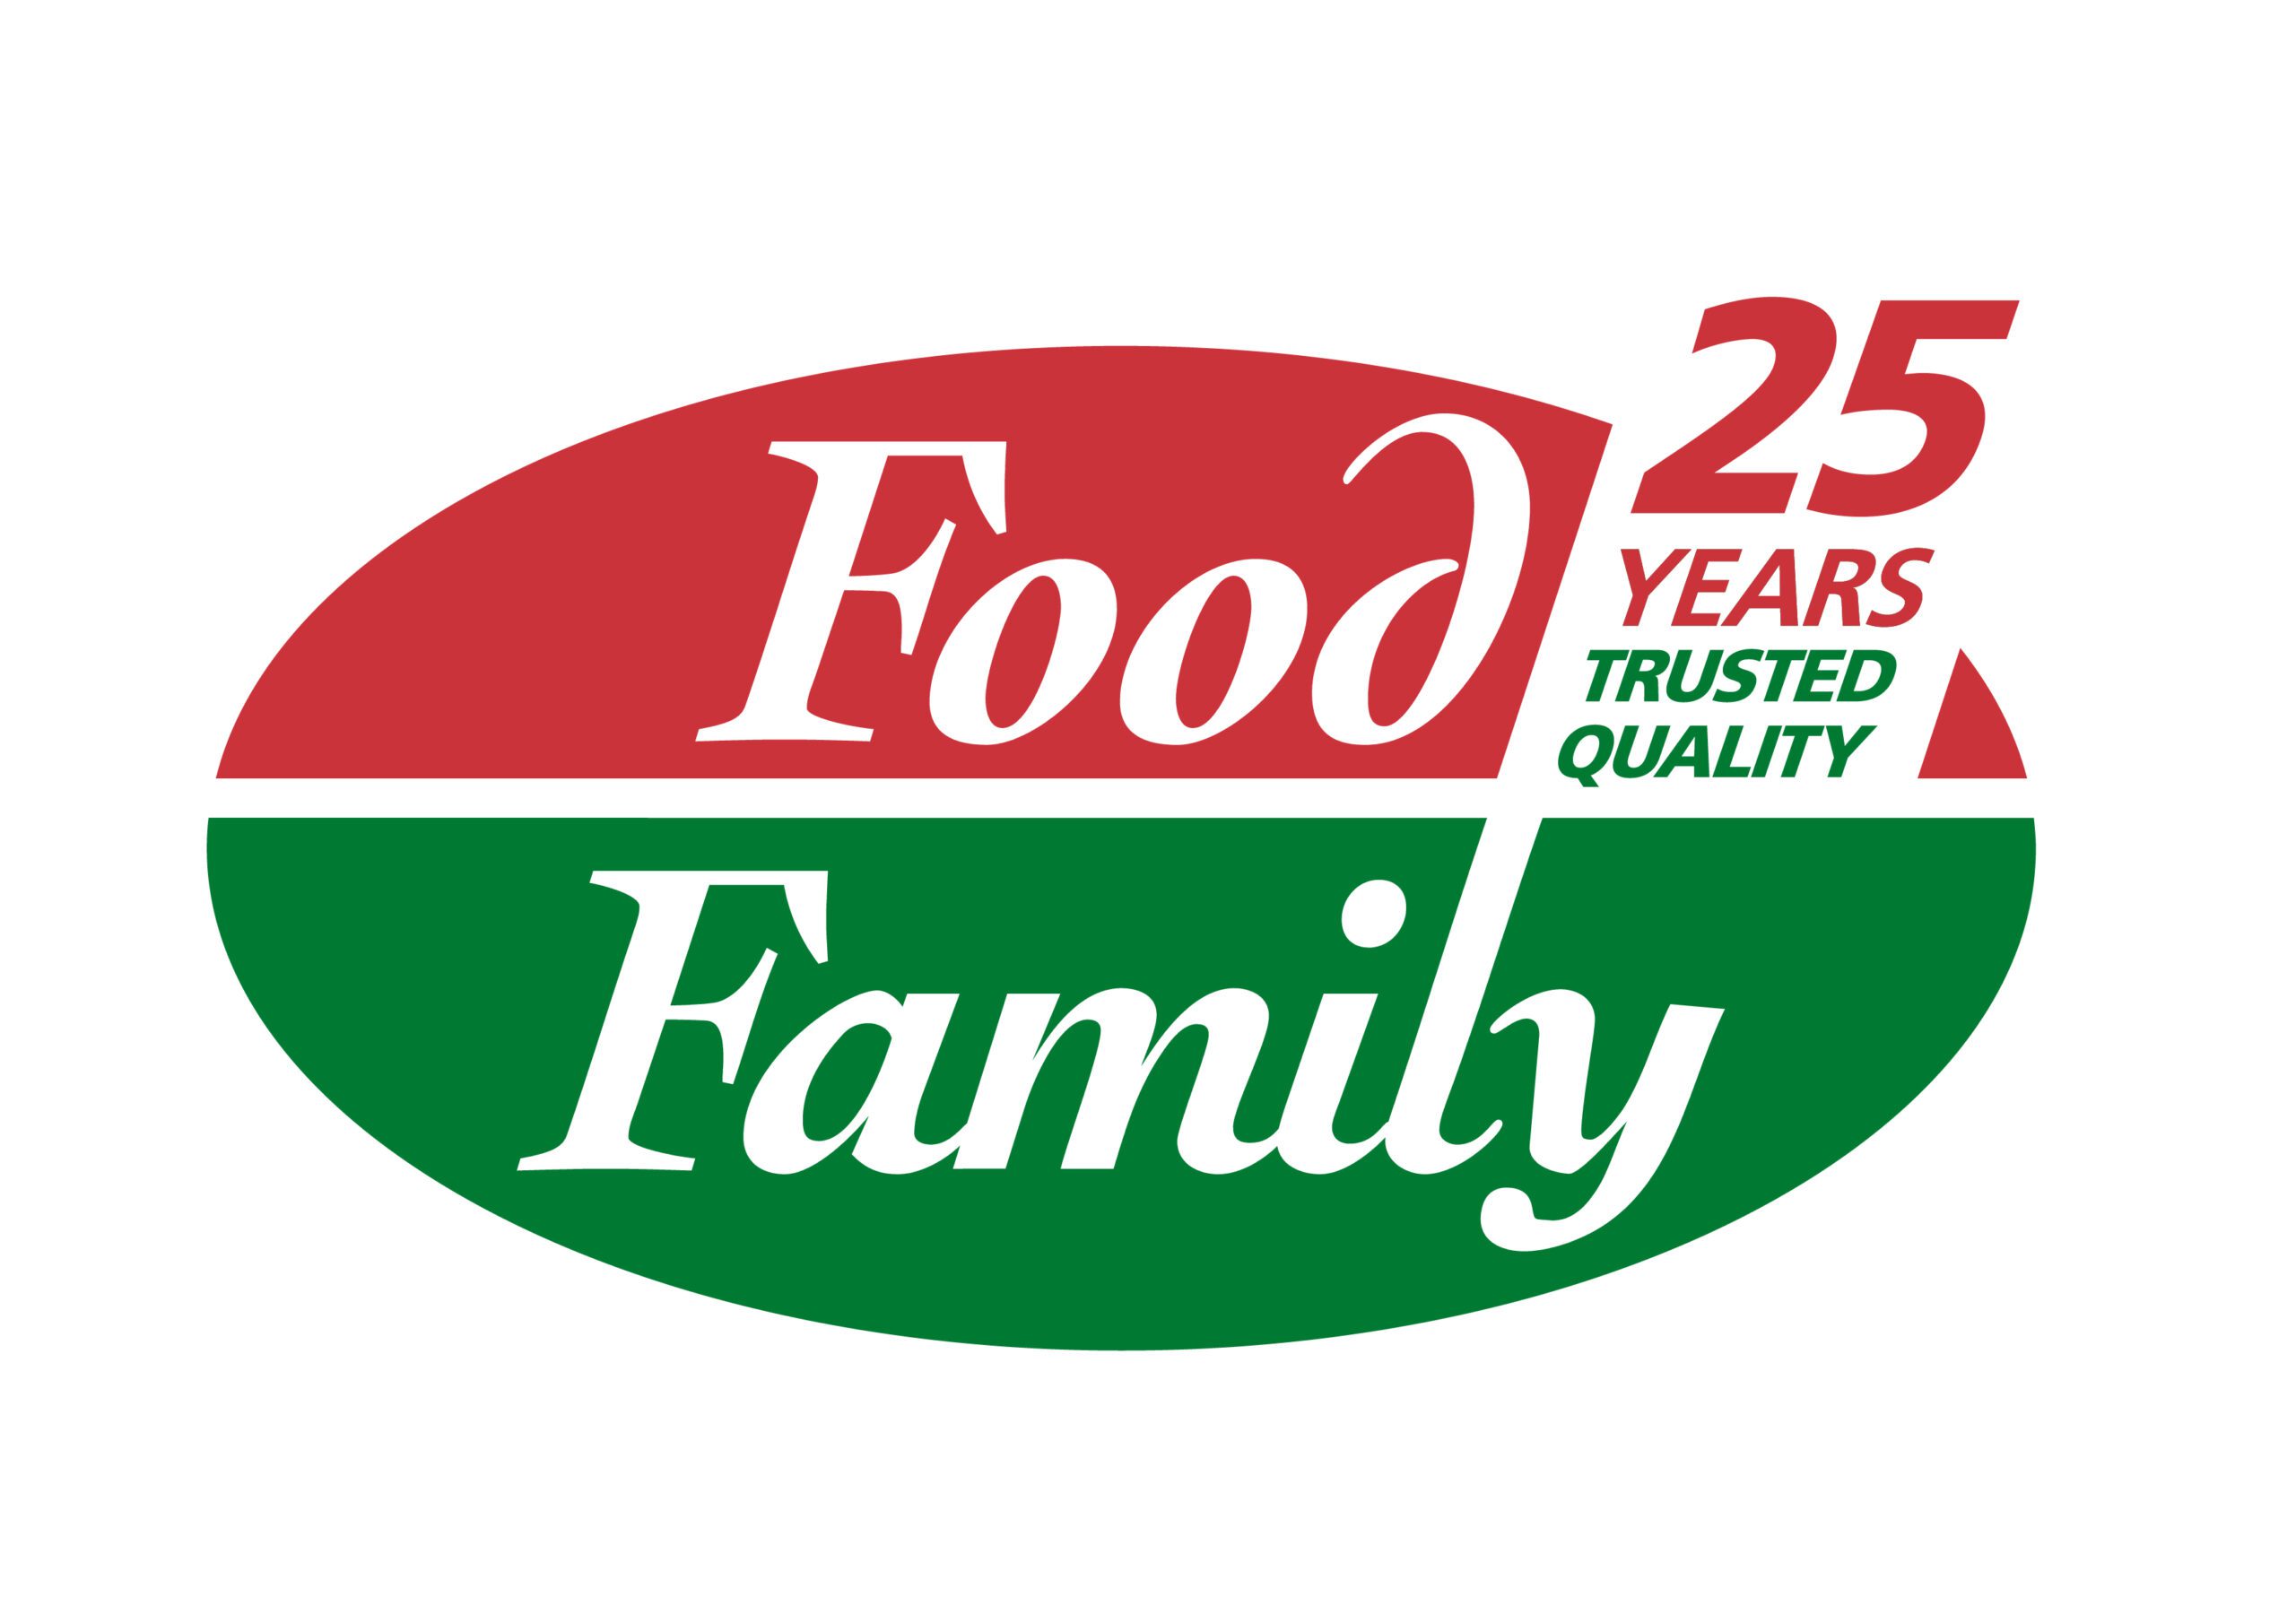 25 Years of Food Family: A quarter century of quality and trust 